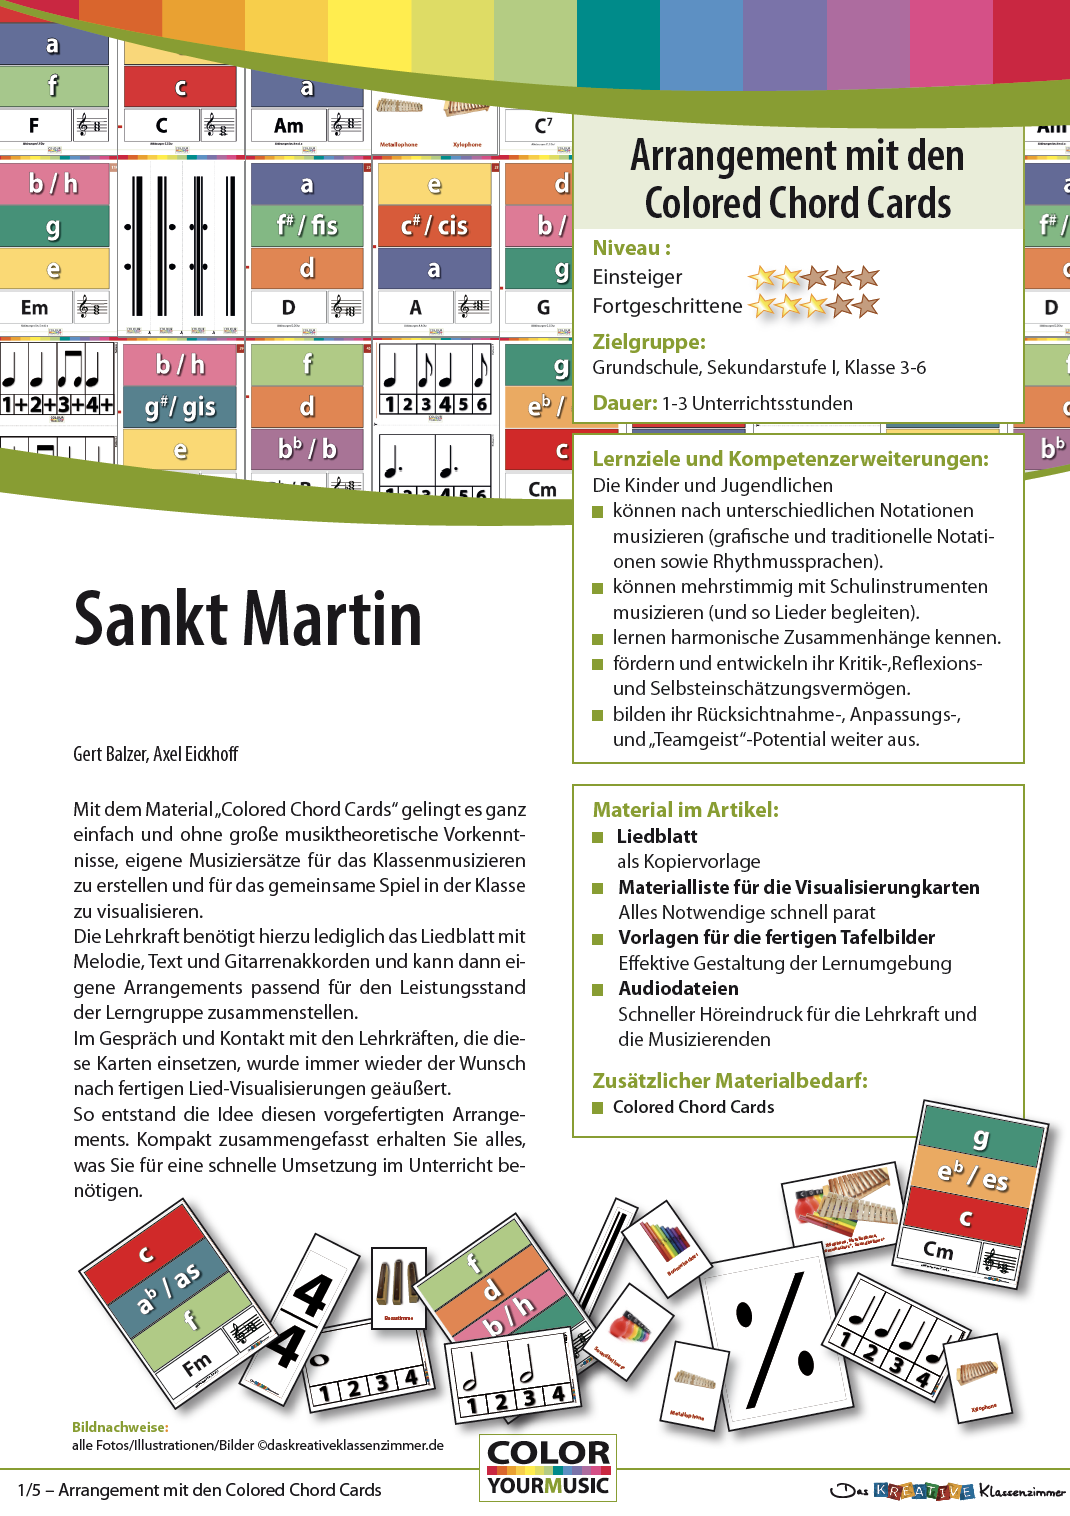 Sankt Martin - Colored Chord Cards